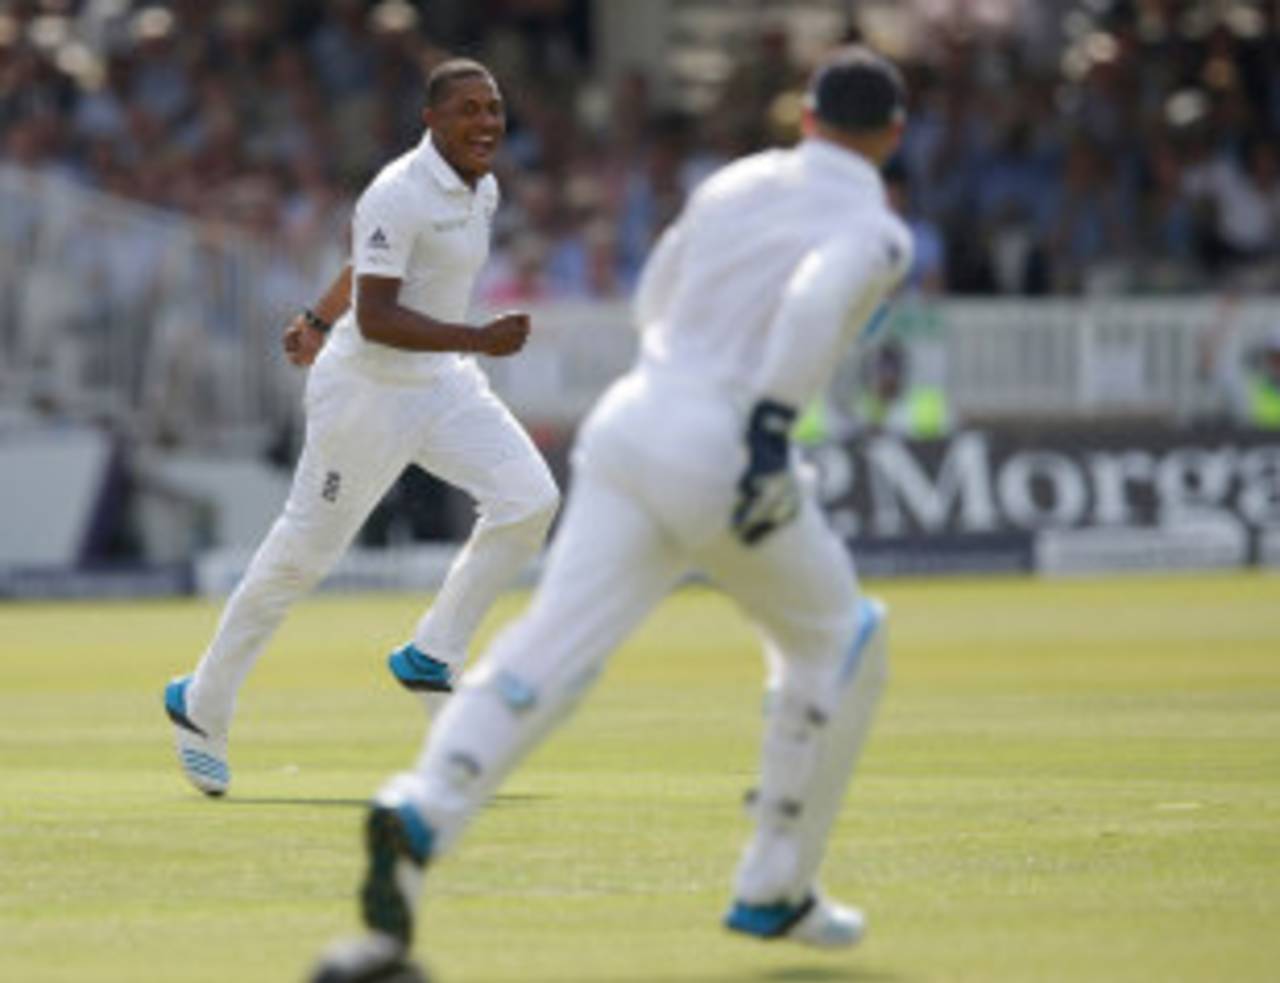 Chris Jordan took a wicket with his third ball in Tests, England v Sri Lanka, 1st Investec Test, Lord's, 2nd day, June 13, 2014